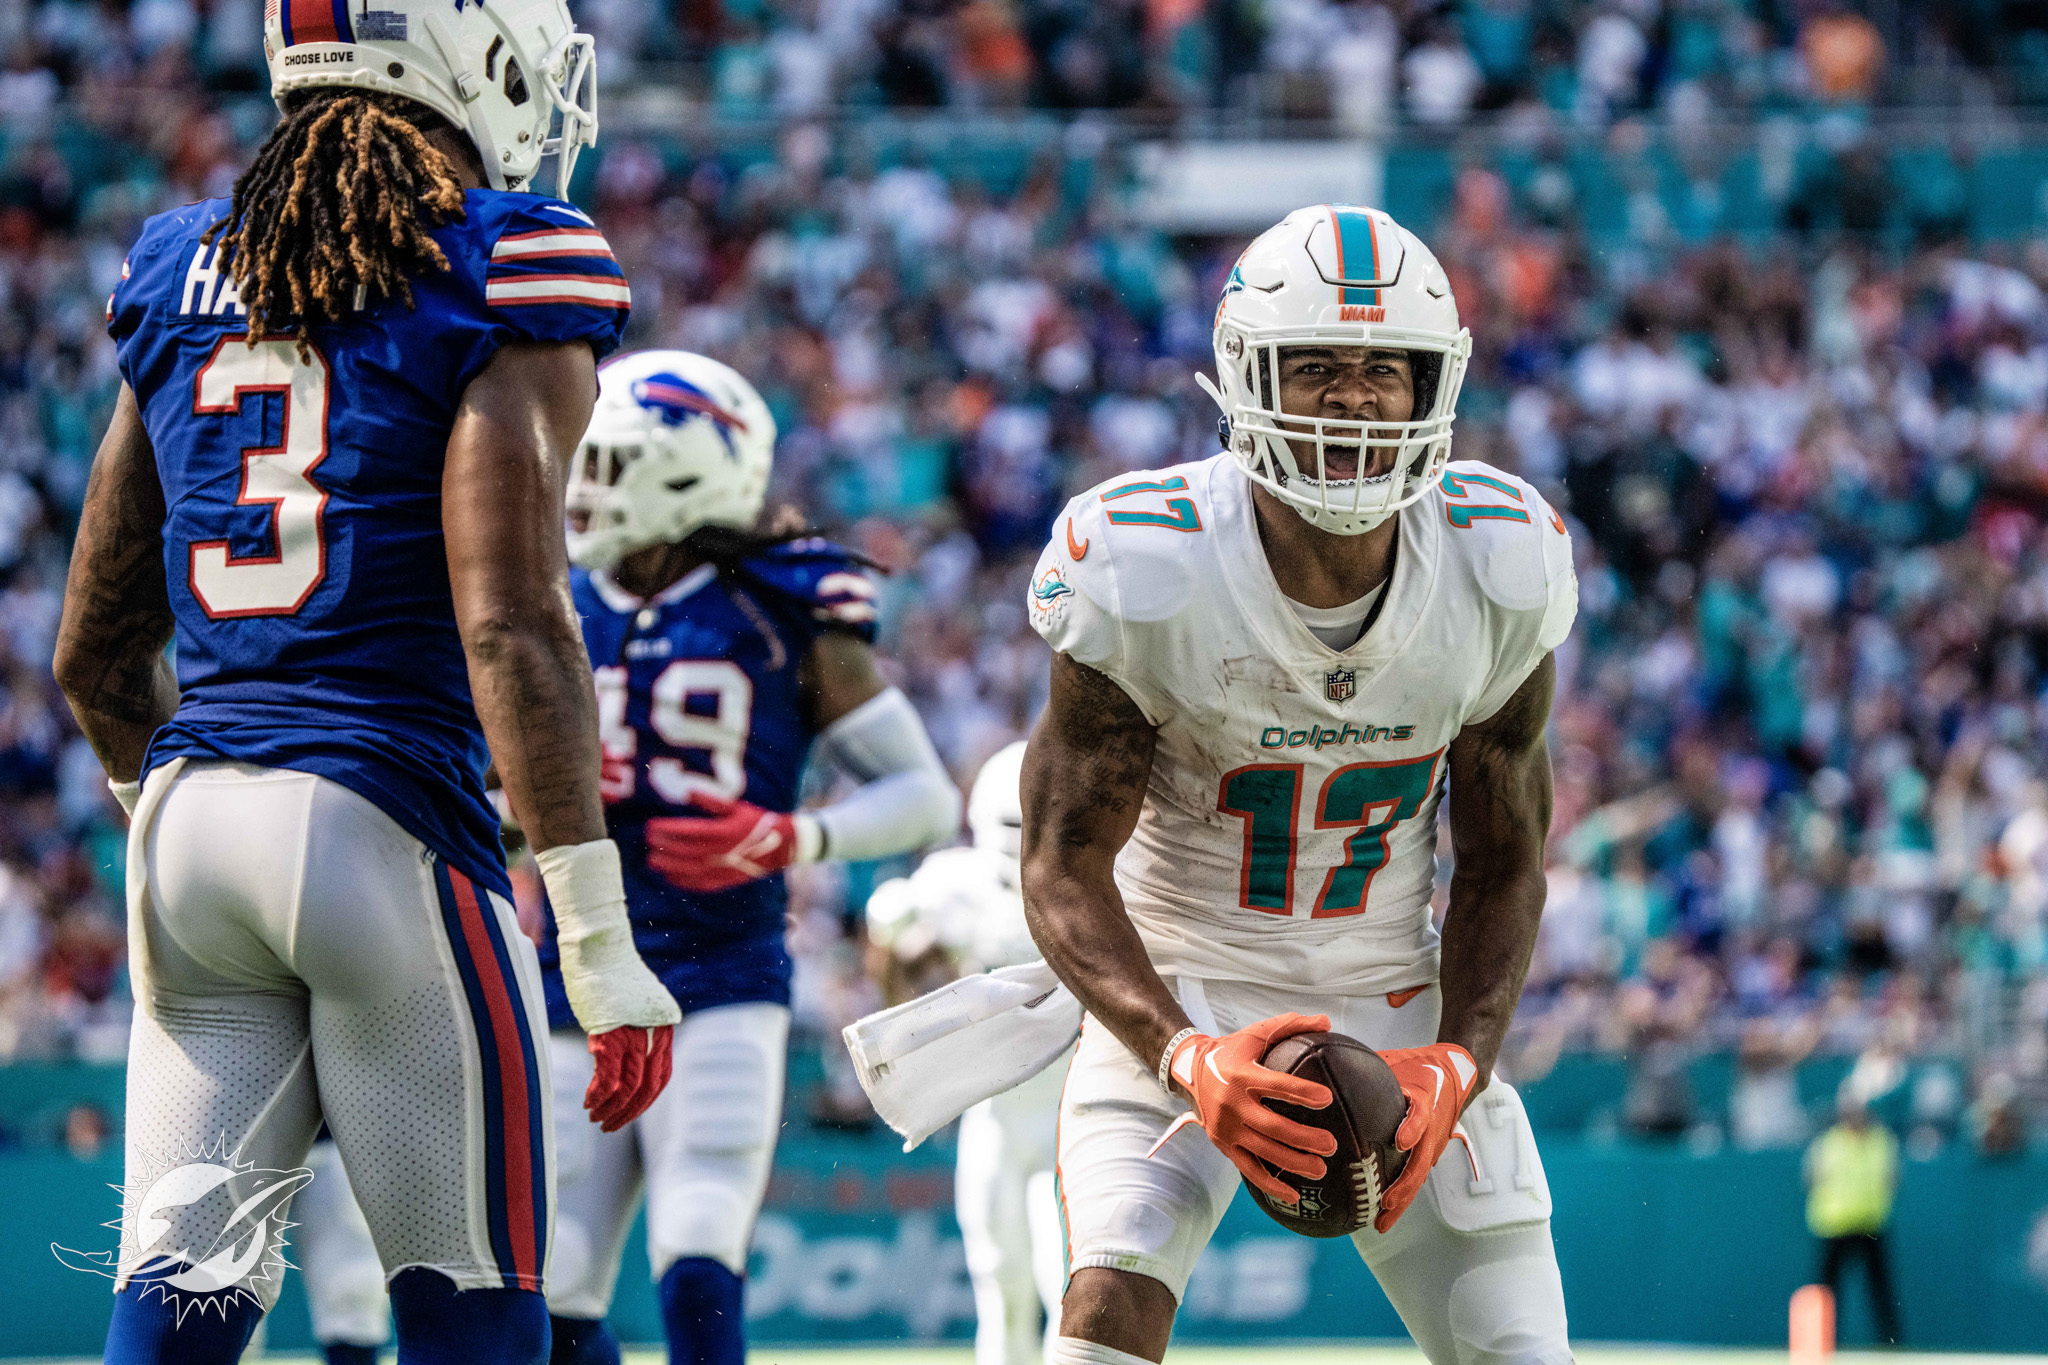 Miami’s Jaylen Waddle clears concussion protocols, LB Jaelan Phillips ruled out Sunday vs. Charges – WSVN 7News | Miami News, Weather, Sports activities | Fort Lauderdale